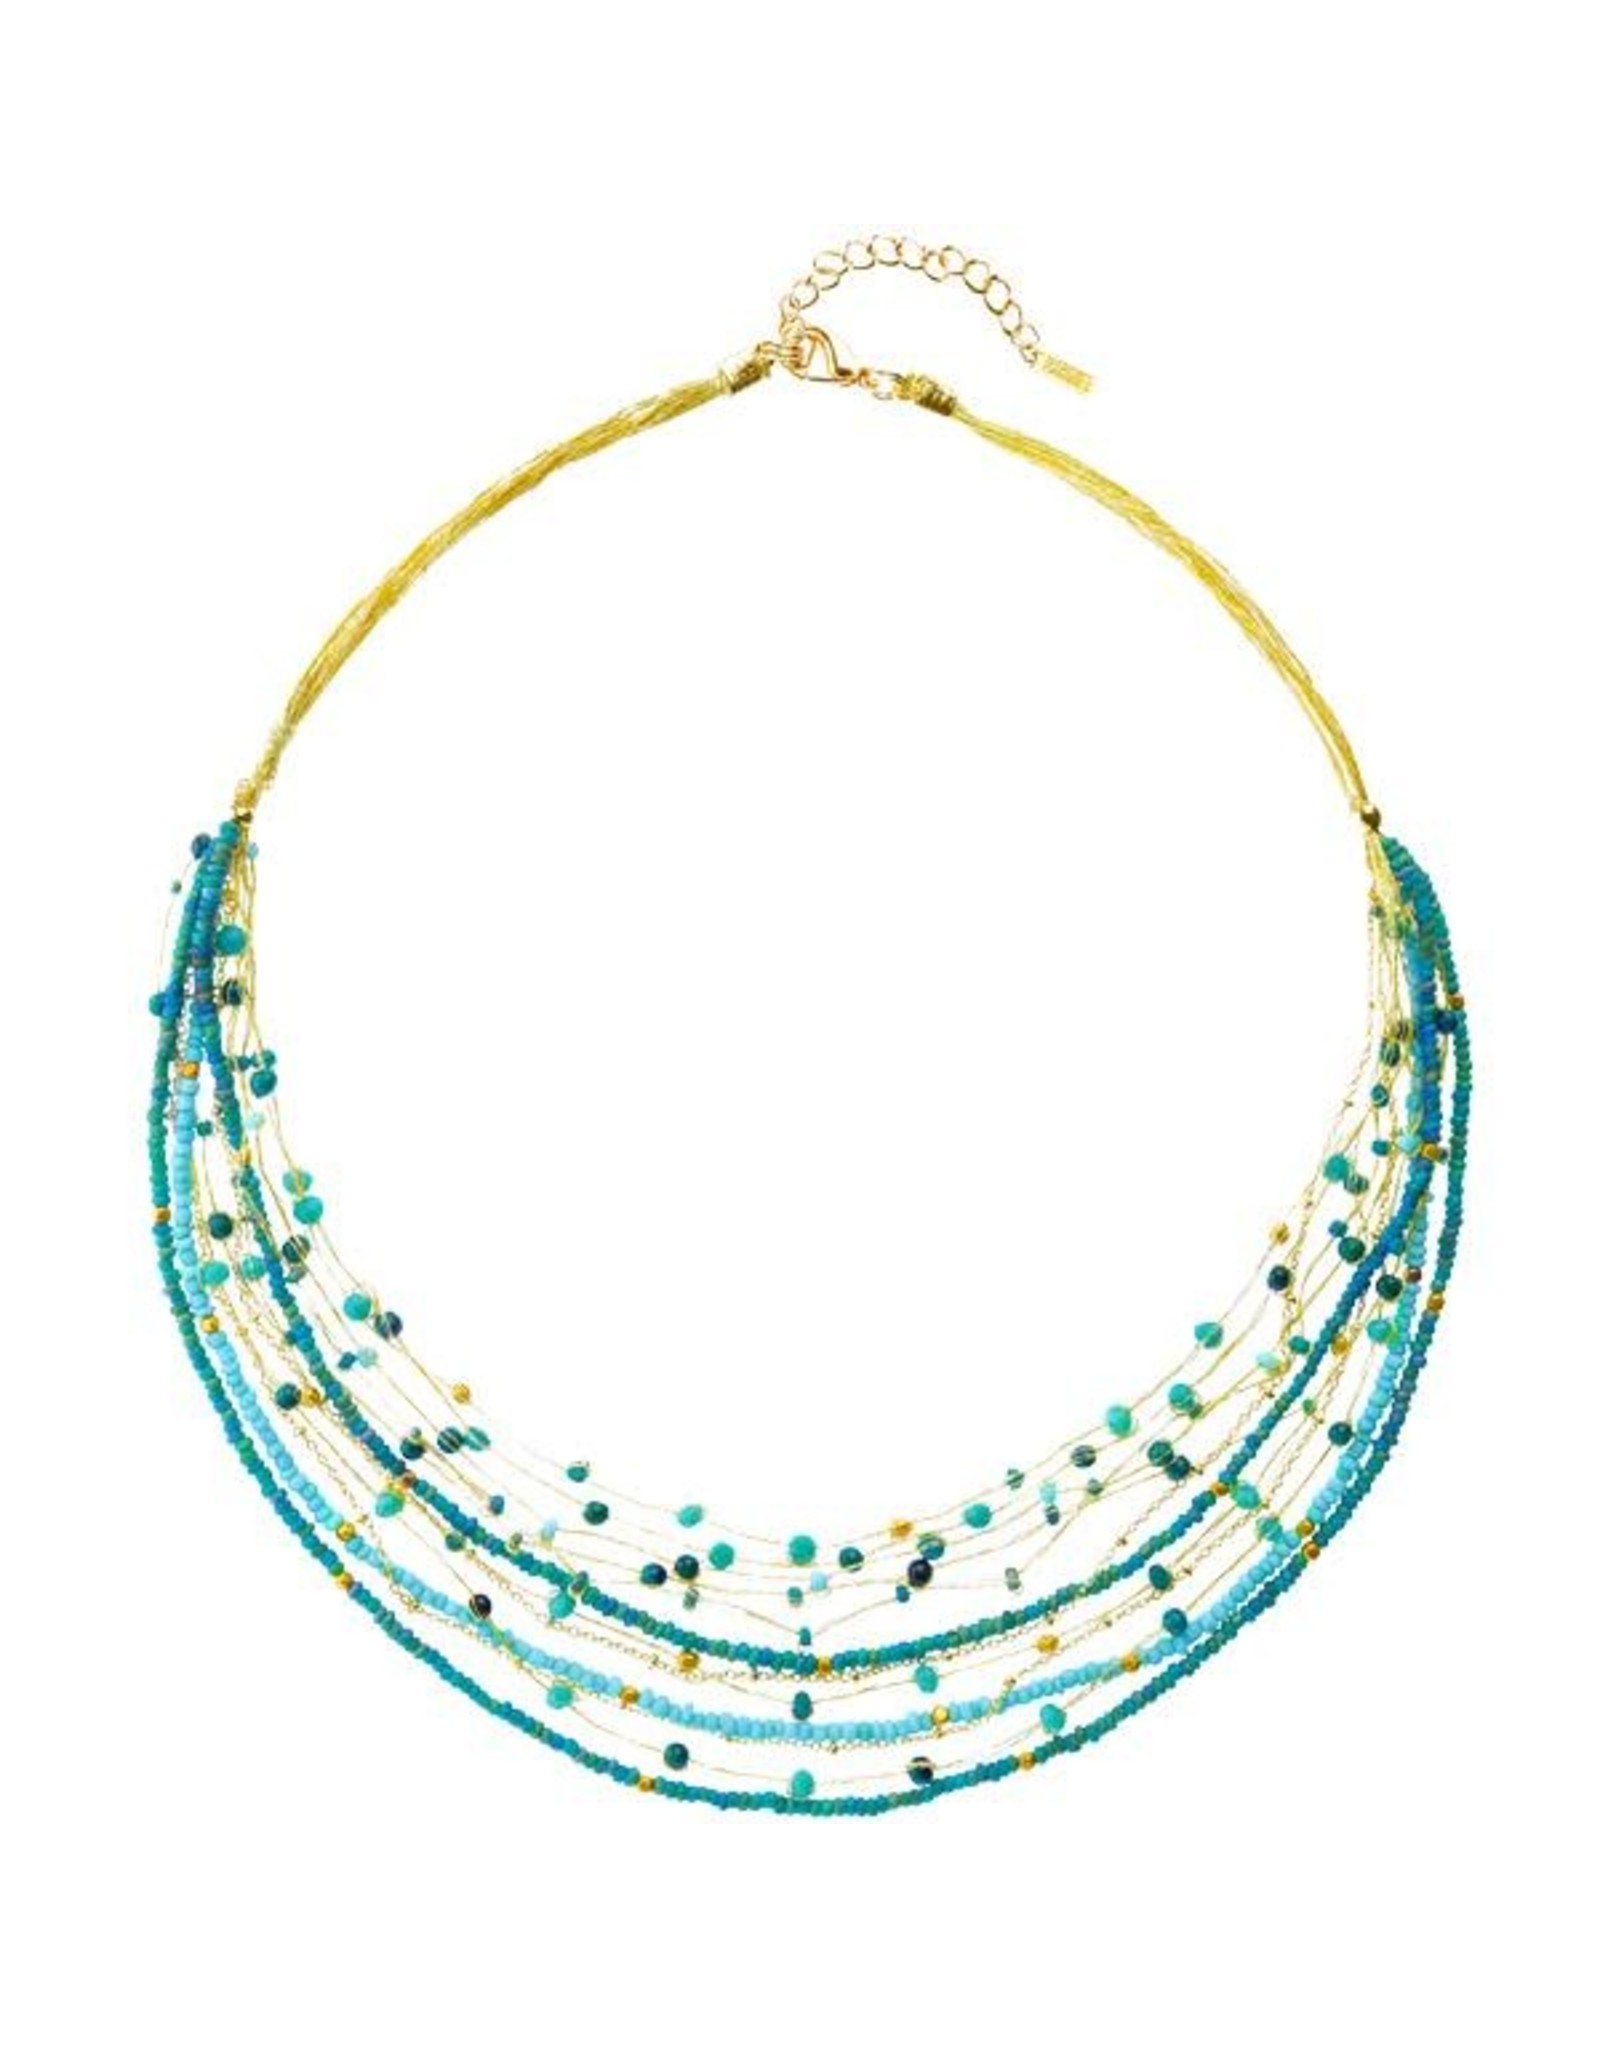 Trade roots Lina Necklace Freshwater, Blue/Greens, Thailand